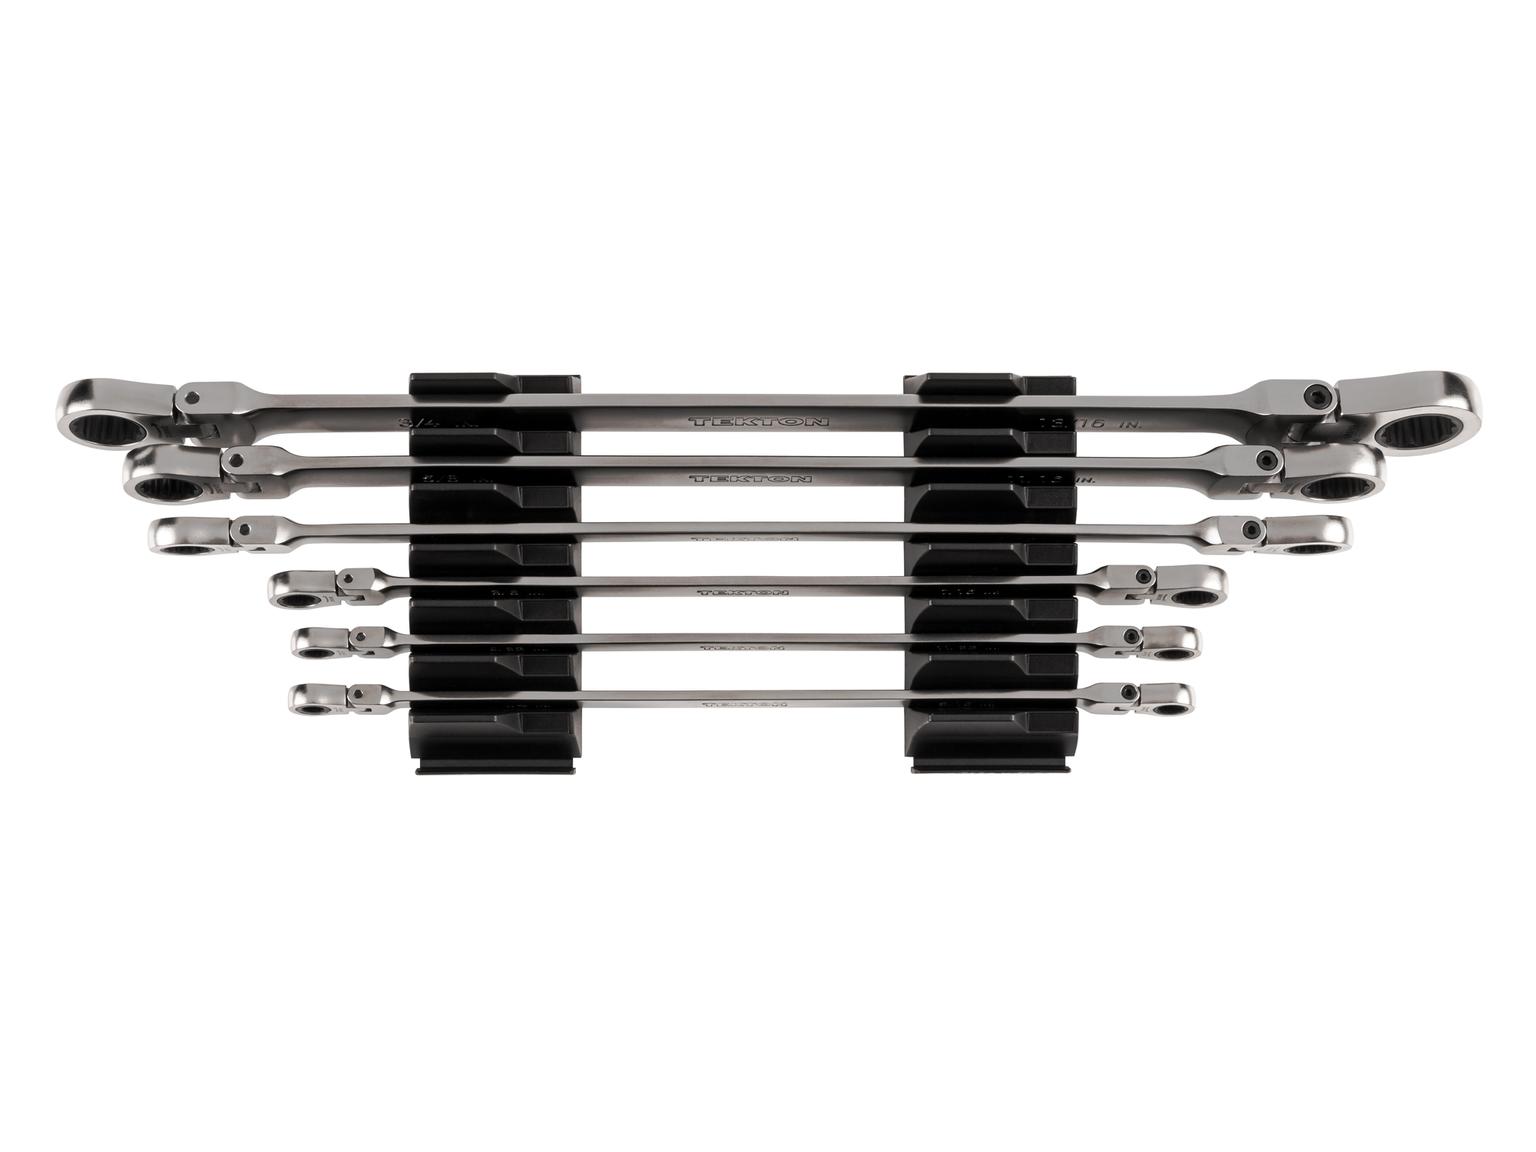 Long Flex Head 12-Point Ratcheting Box End Wrench Set, 6-Piece (Modular Slotted Organizer)